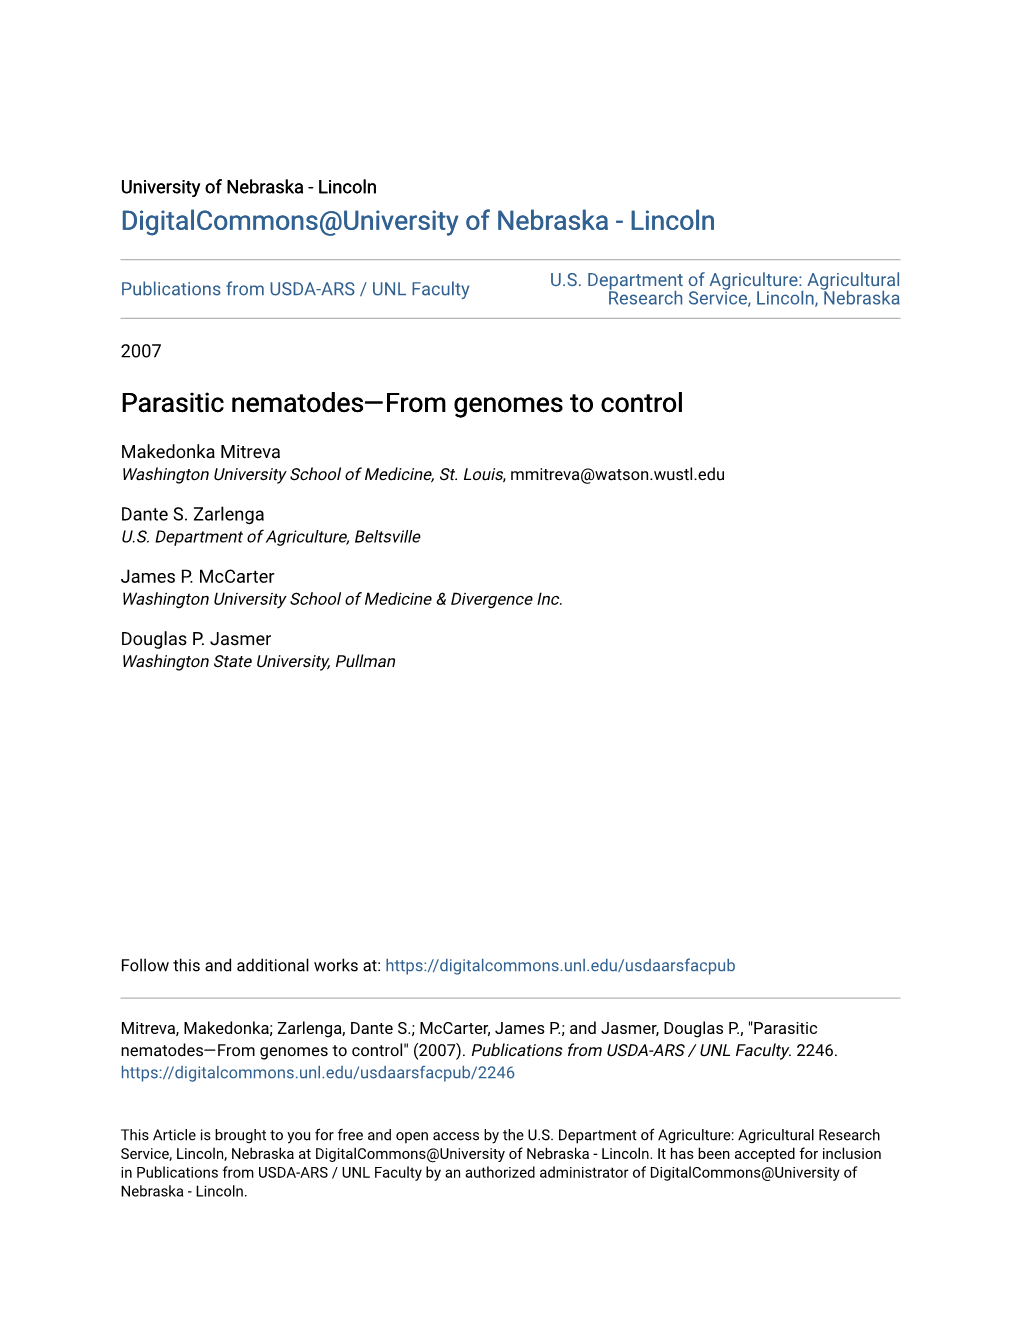 Parasitic Nematodes—From Genomes to Control